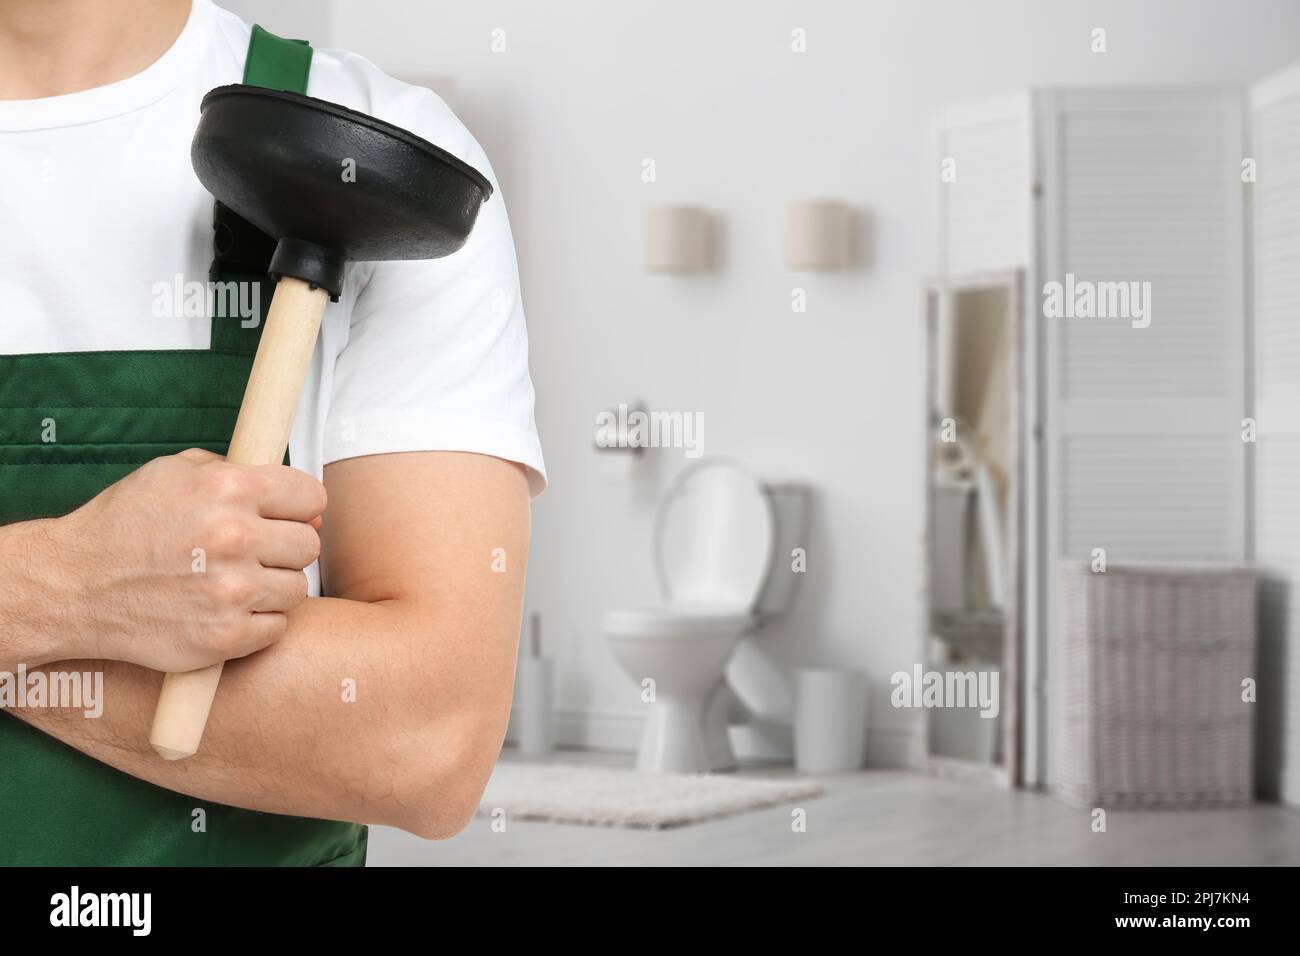 https://c8.alamy.com/comp/2PJ7KN4/plumber-holding-plunger-in-bathroom-closeup-space-for-text-2PJ7KN4.jpg